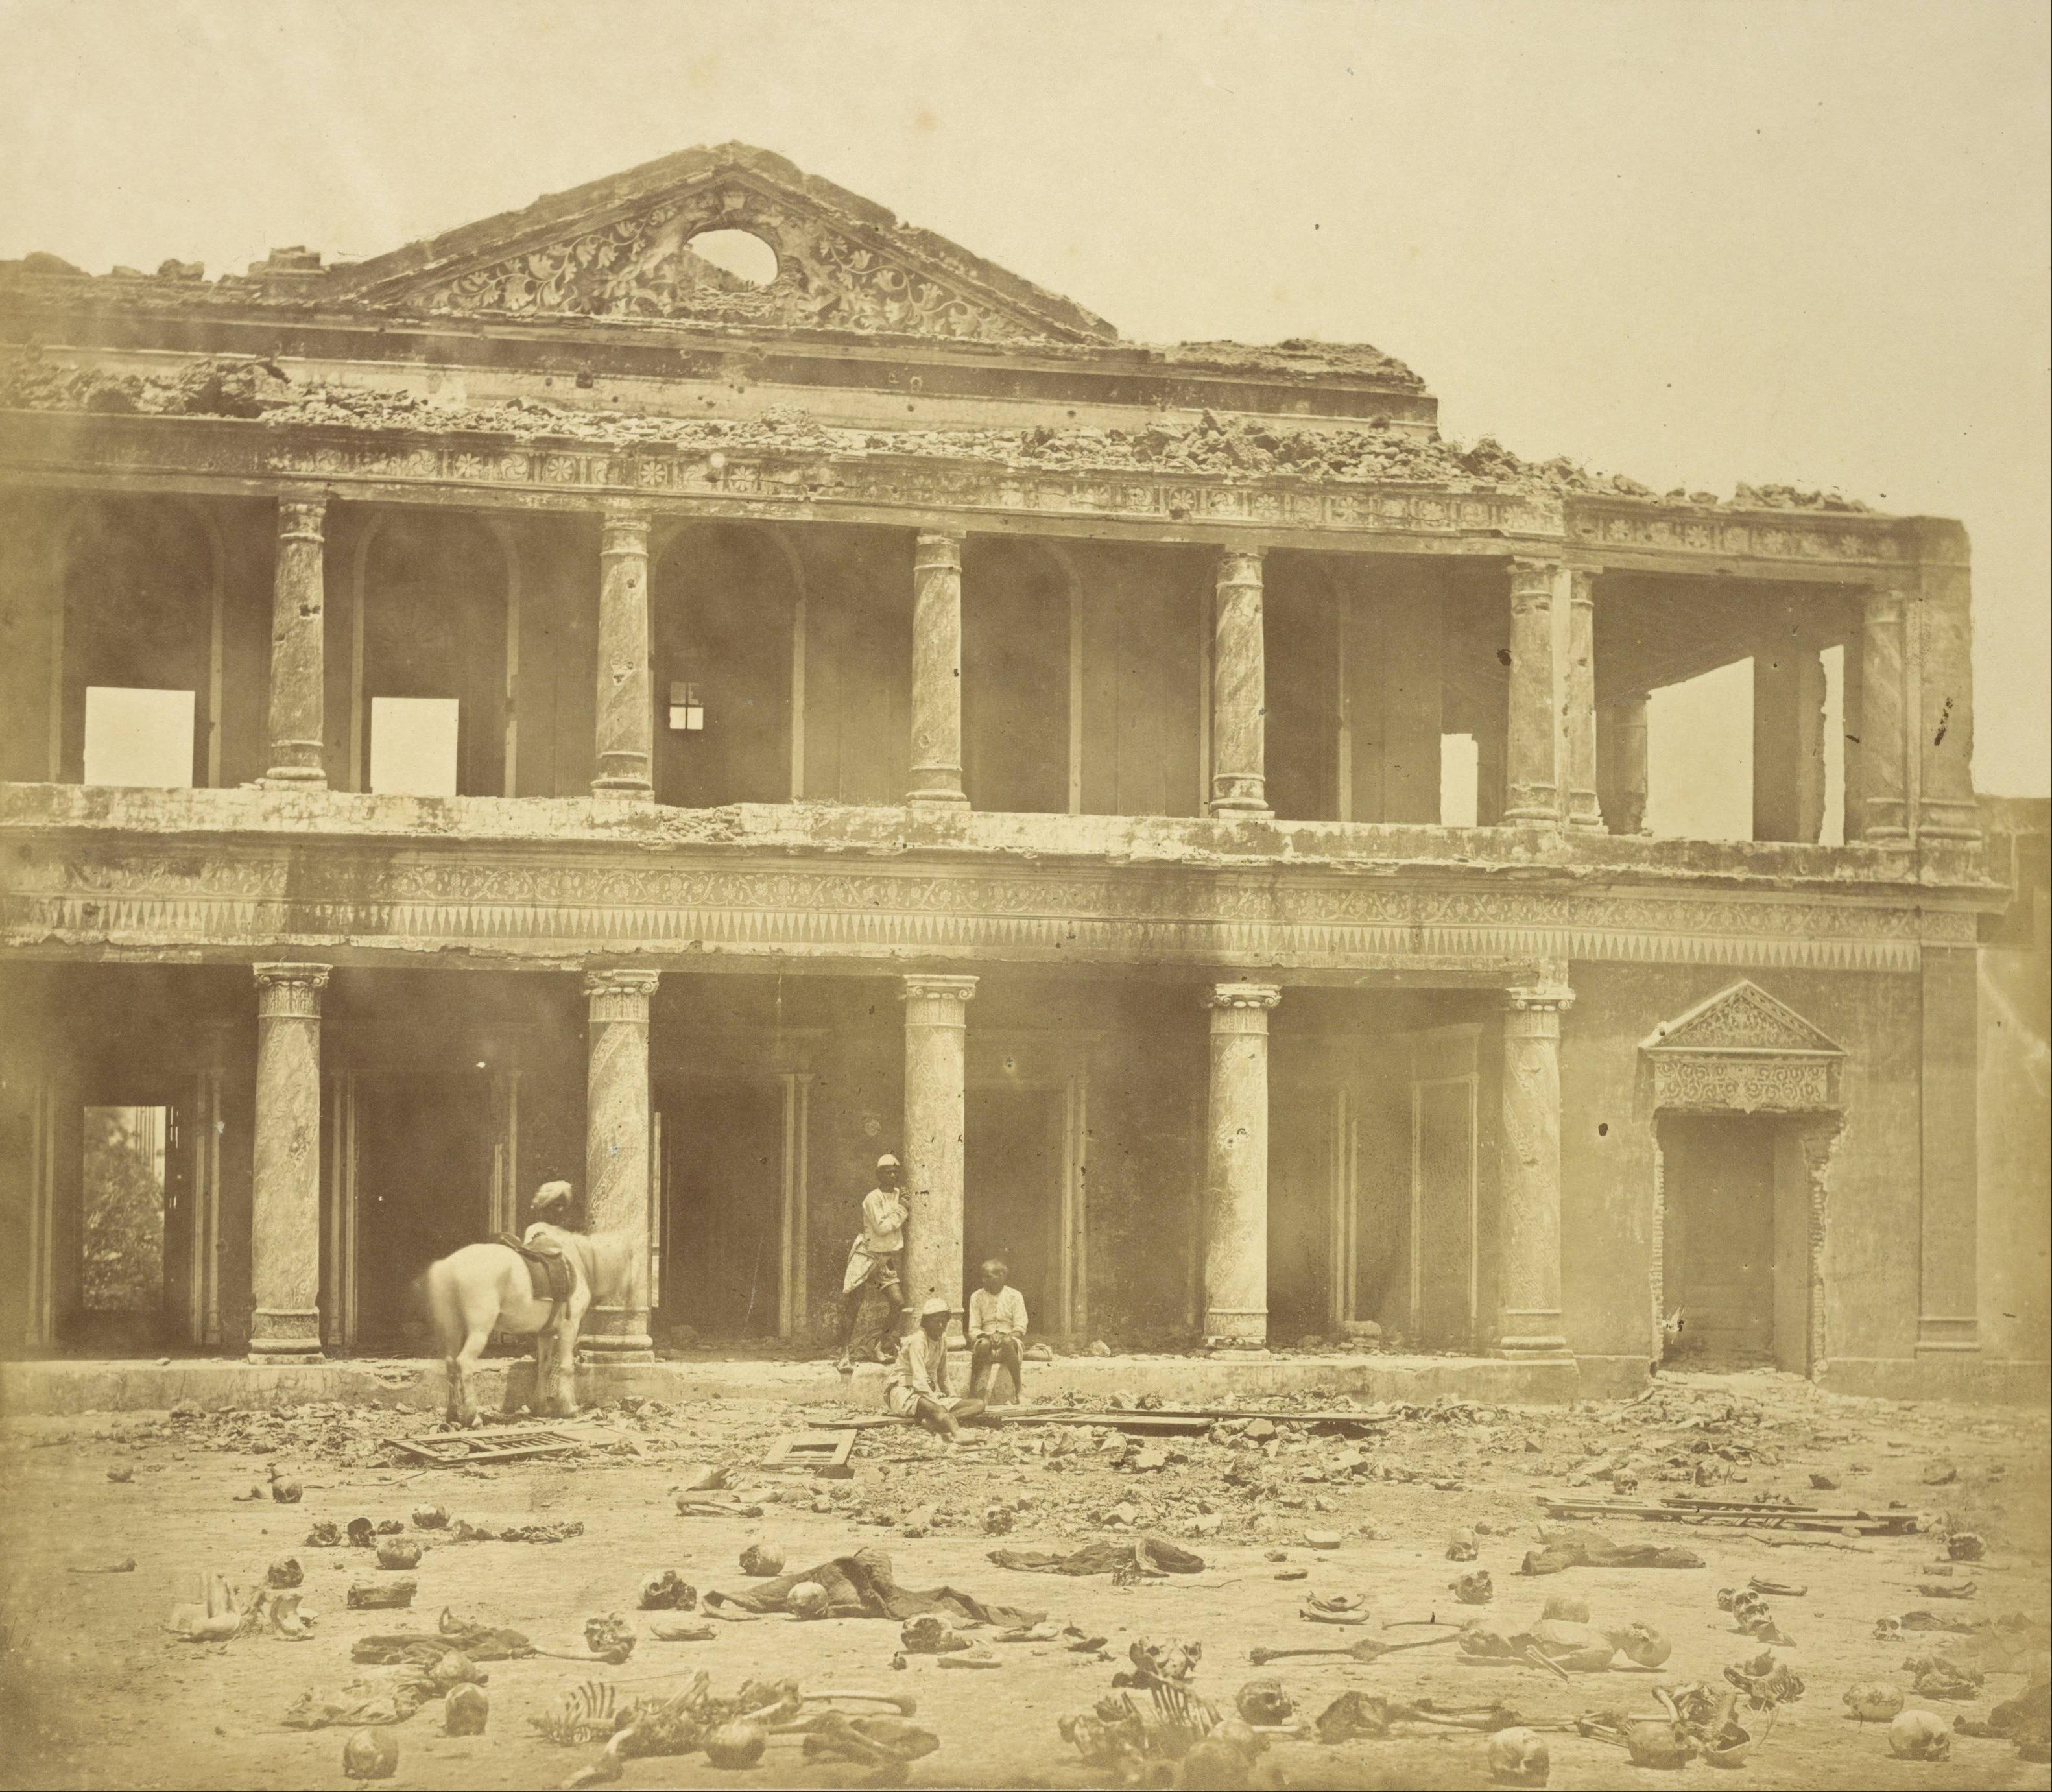 Secundrabagh, Lucknow, After the Slaughter